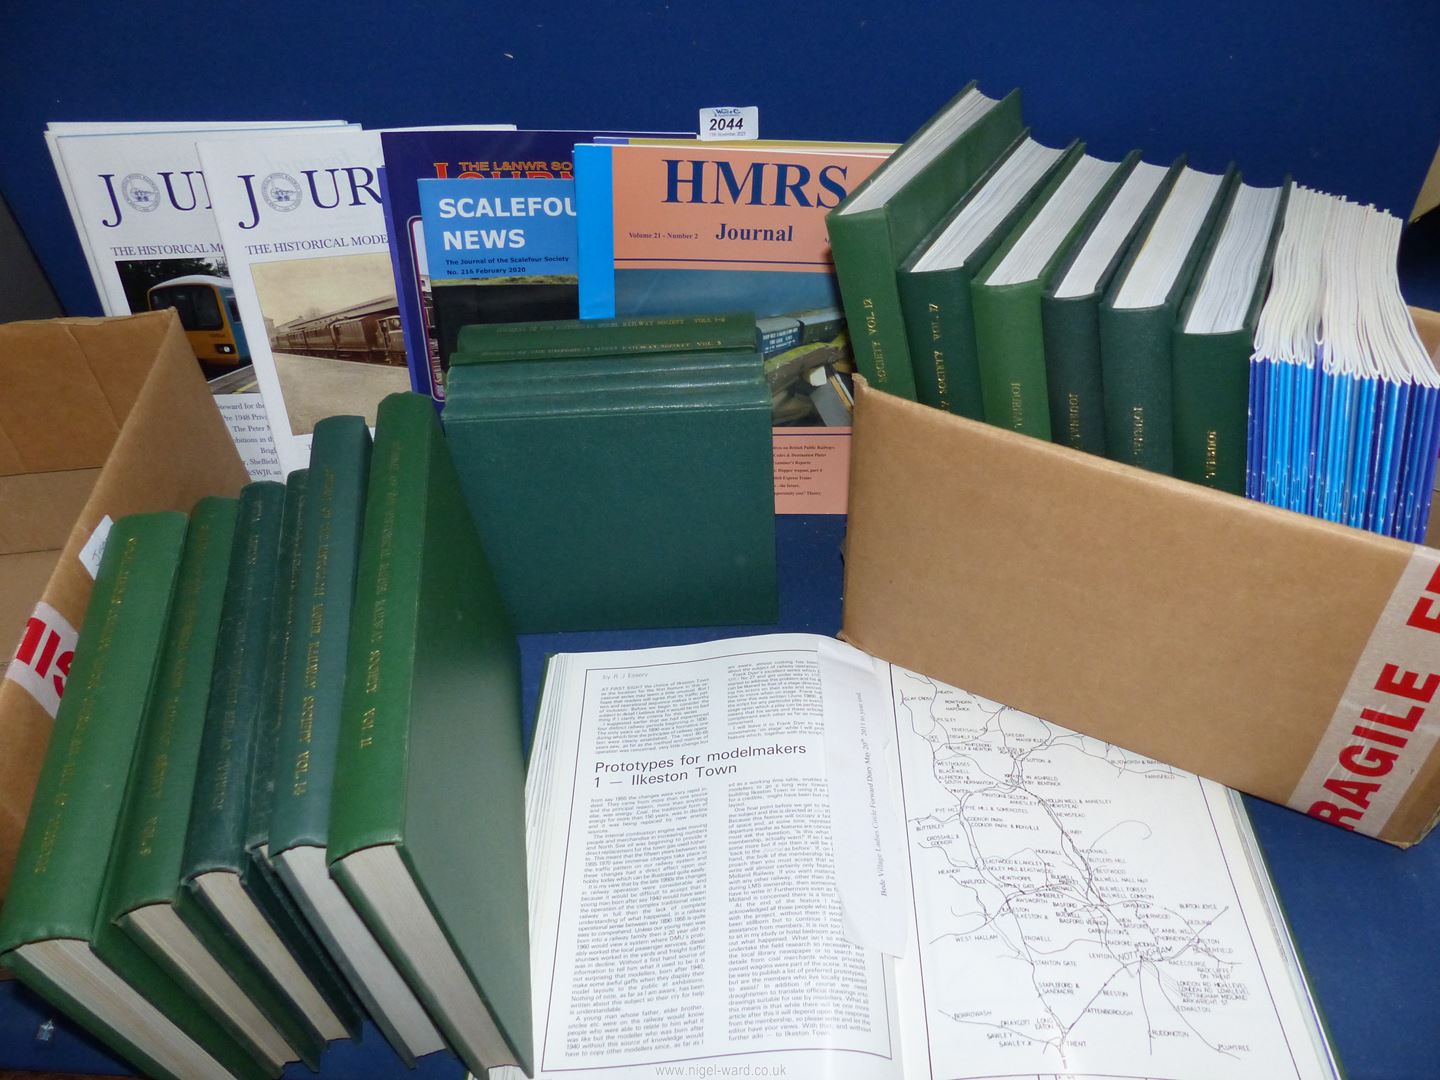 A quantity of The Historical Model Railway Society Journal, along with a quantity of HMRS journals.